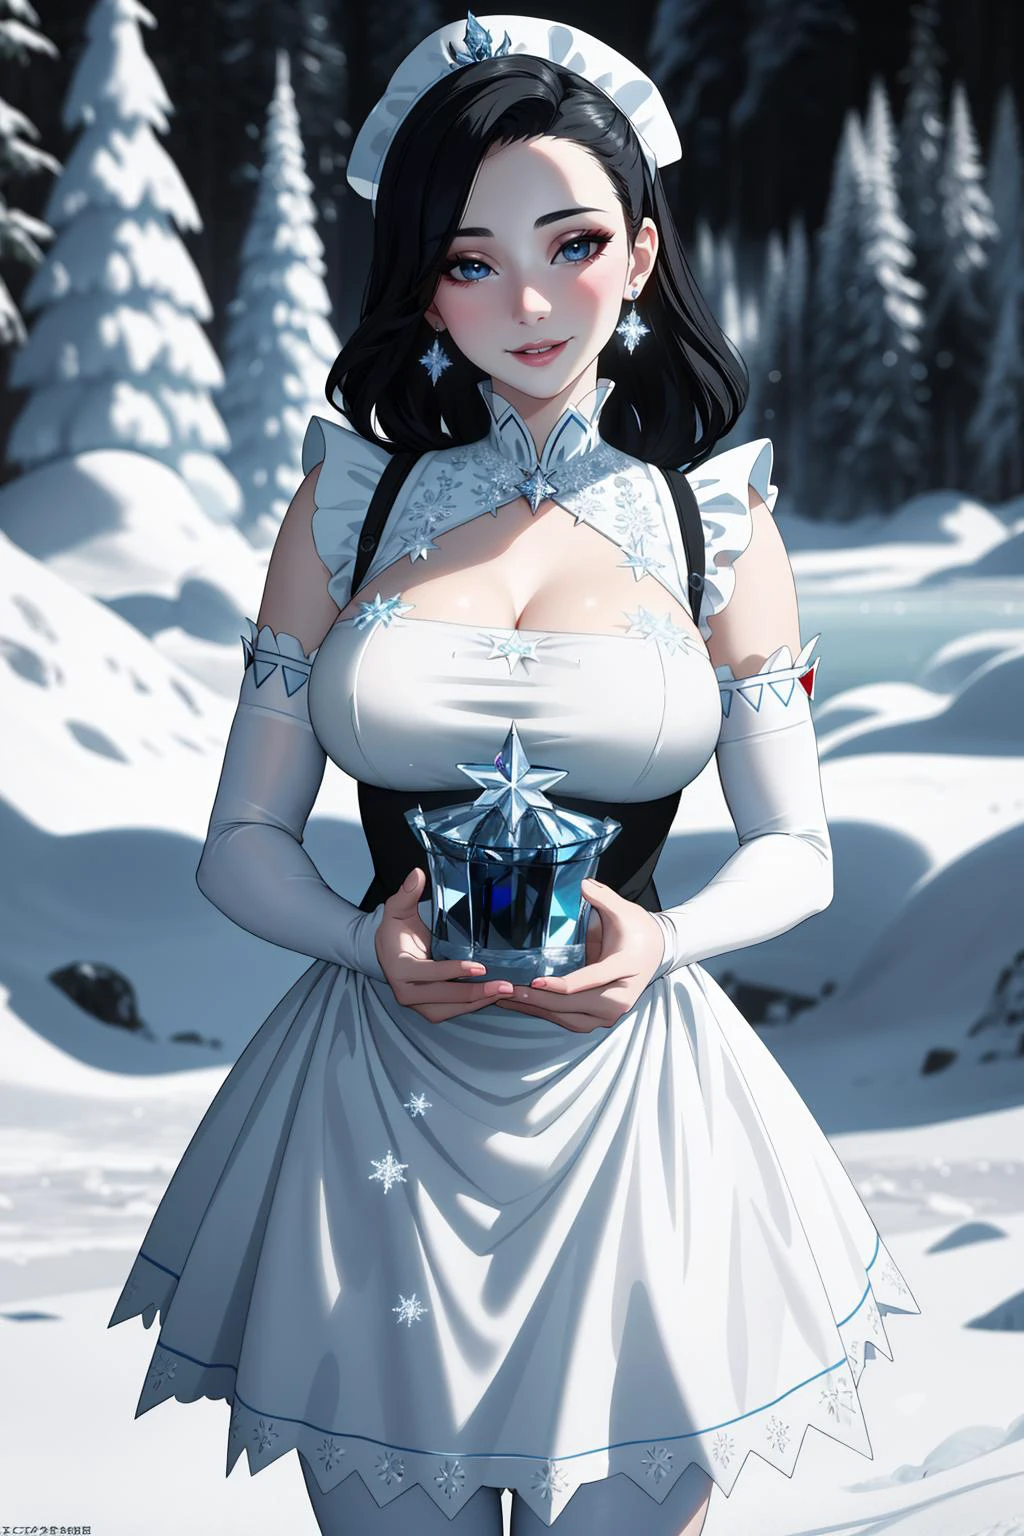 ((Masterpiece, best quality,edgQuality)),smiling,standing,posing for a picture,
edgApron, edgice, woman in a apron,ice,snow flakes ,wearing edgice edgApron
 